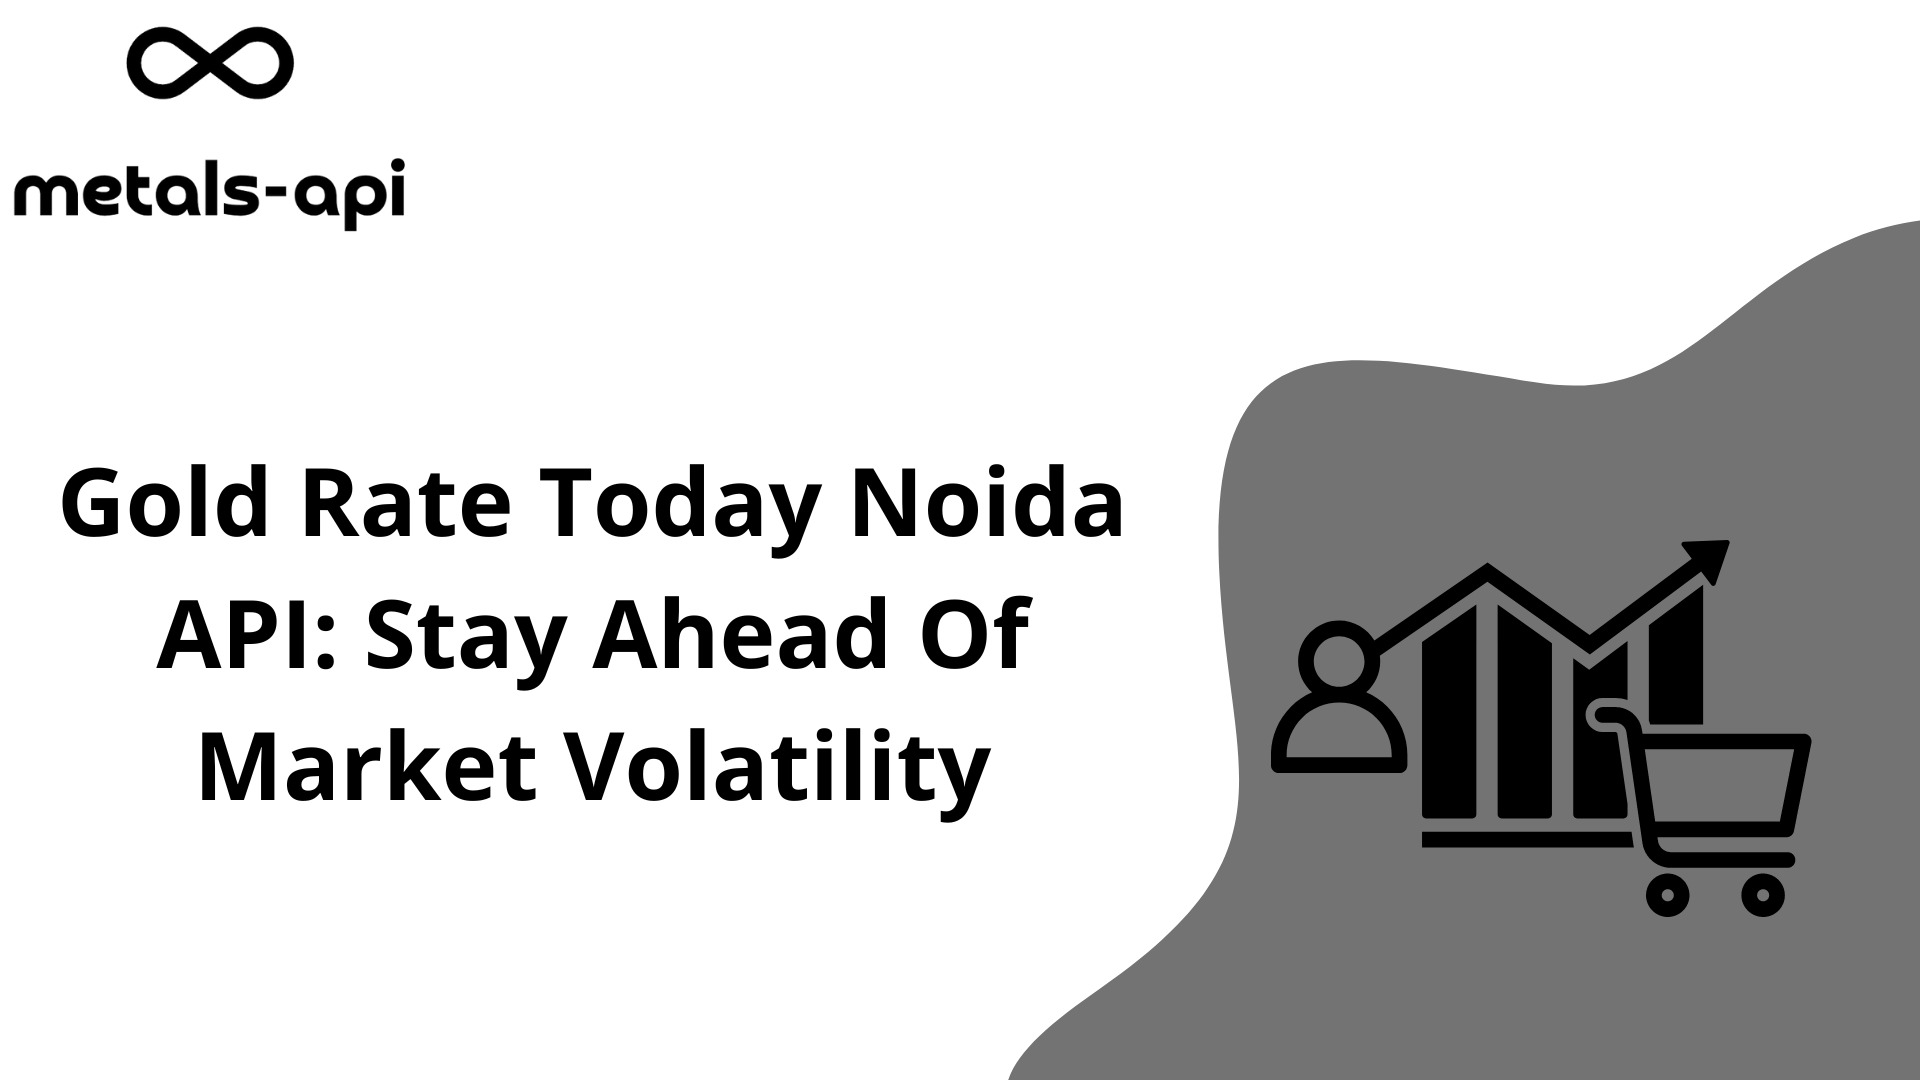 Gold Rate Today Noida API: Stay Ahead Of Market Volatility